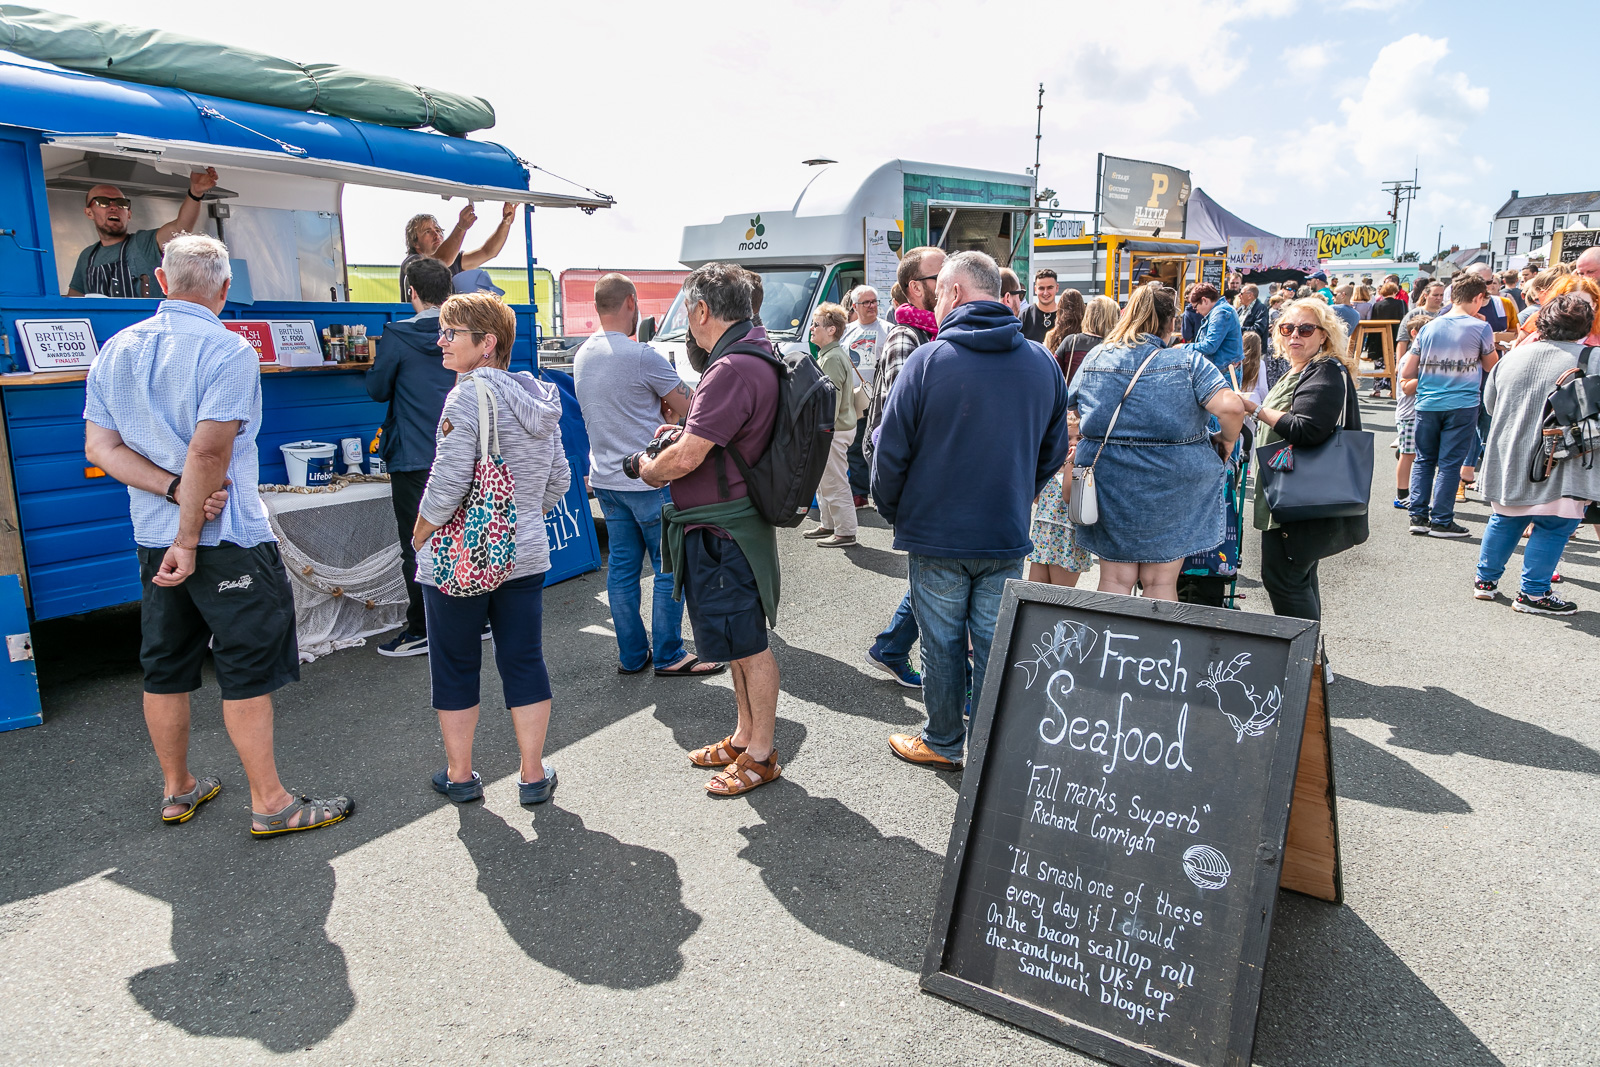 Milford Haven Street Food Festival 4th 6th August